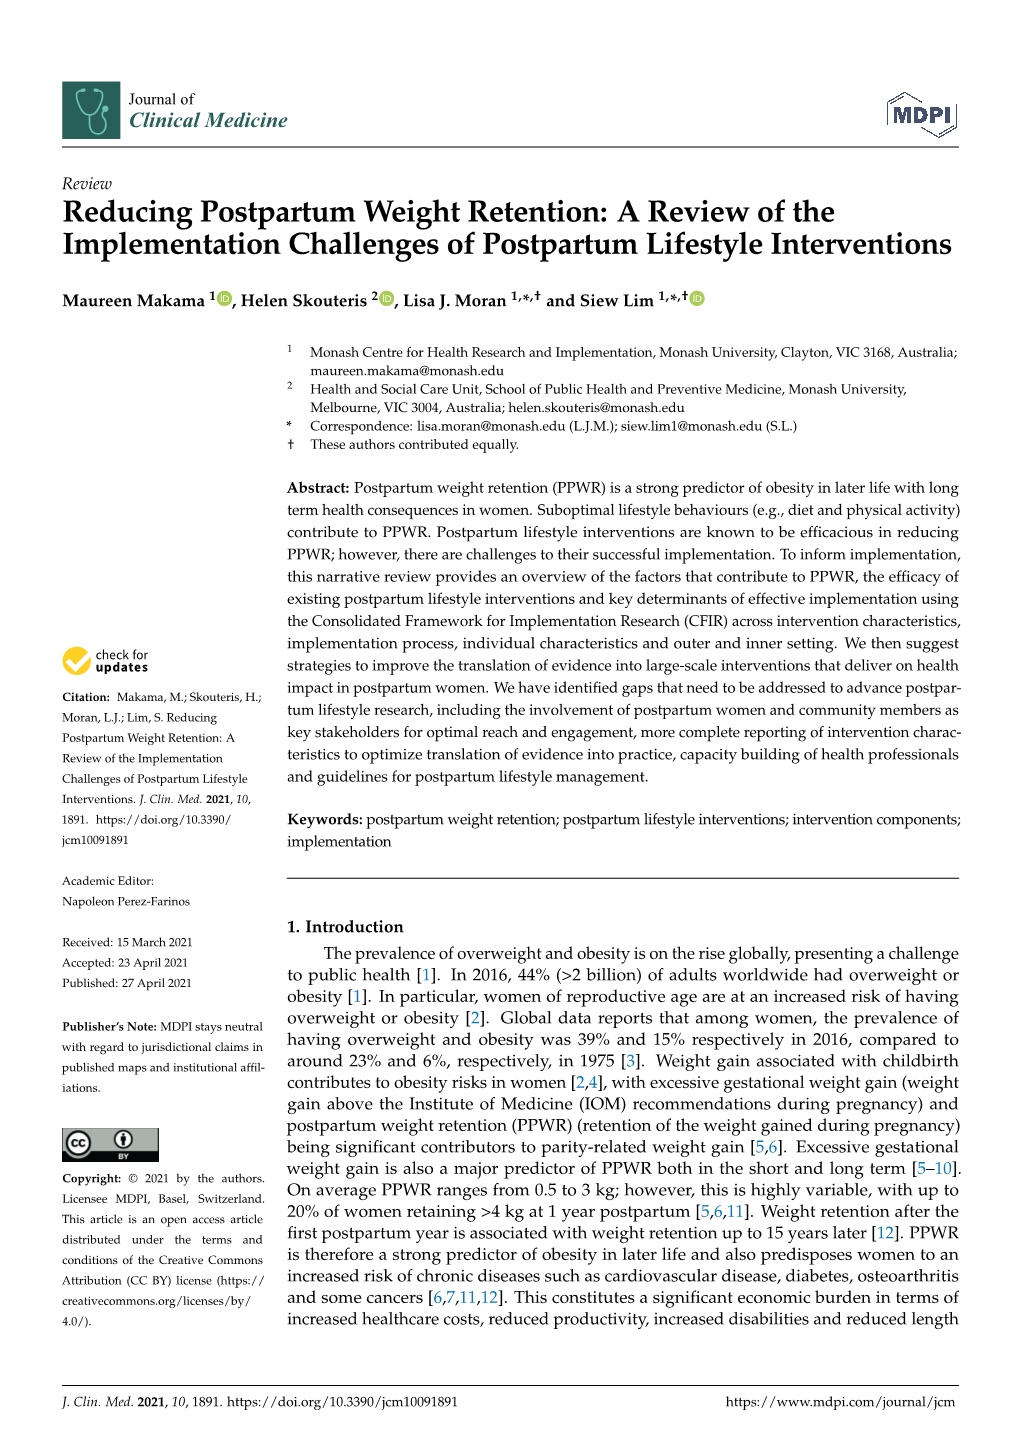 Reducing Postpartum Weight Retention: a Review of the Implementation Challenges of Postpartum Lifestyle Interventions